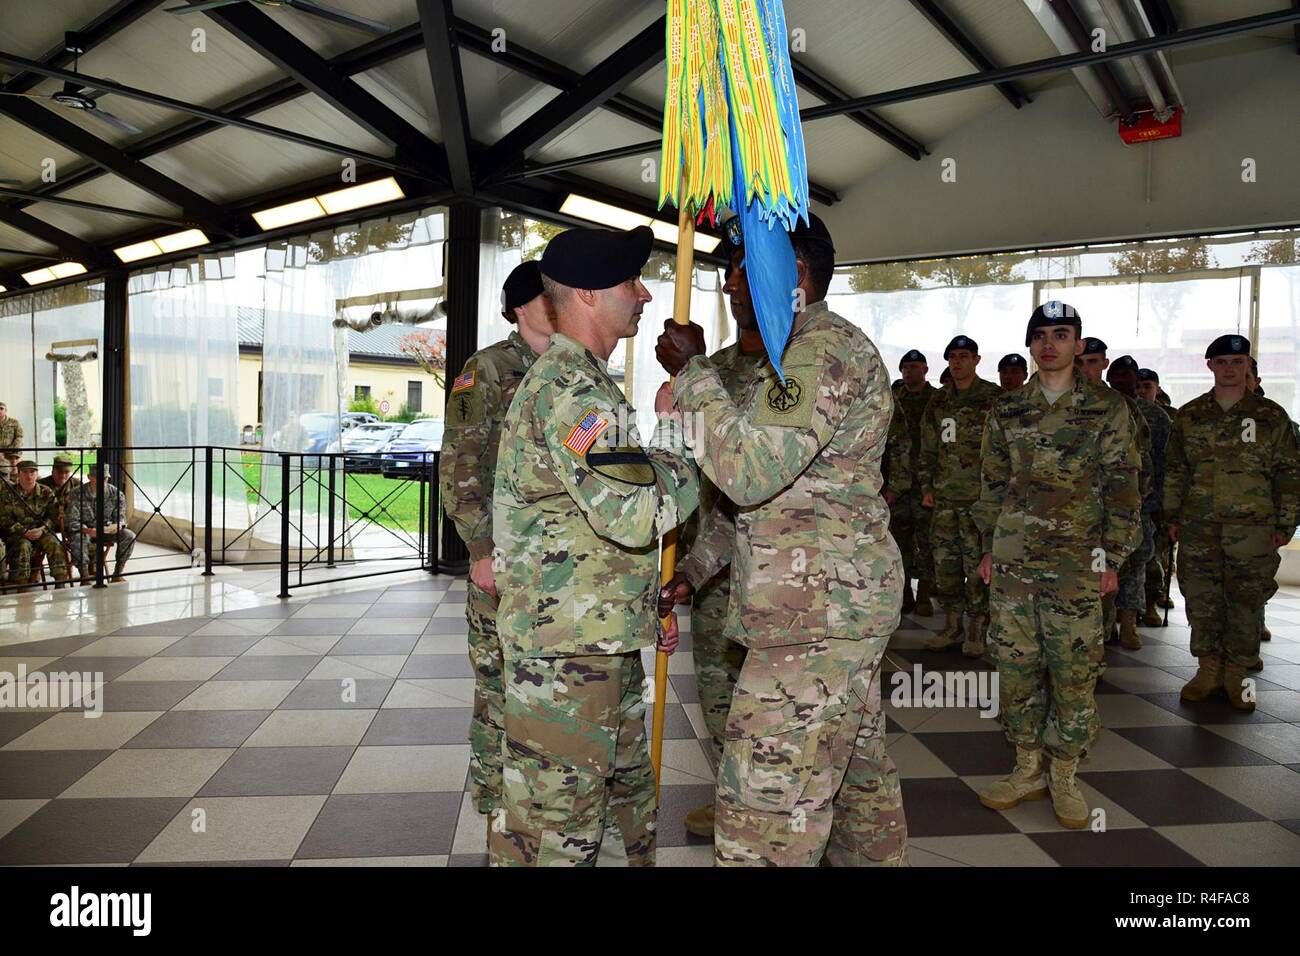 (From left) Lt. Col. Dylan Randazzo, commander of 307th Military Intelligence Battalion, receives the company guidon from Capt. Lawrence P. Lyons, former Bravo Company commander, Oct 24, 2016, during the change of command ceremony at Caserma Ederle in Vicenza, Italy. Stock Photo